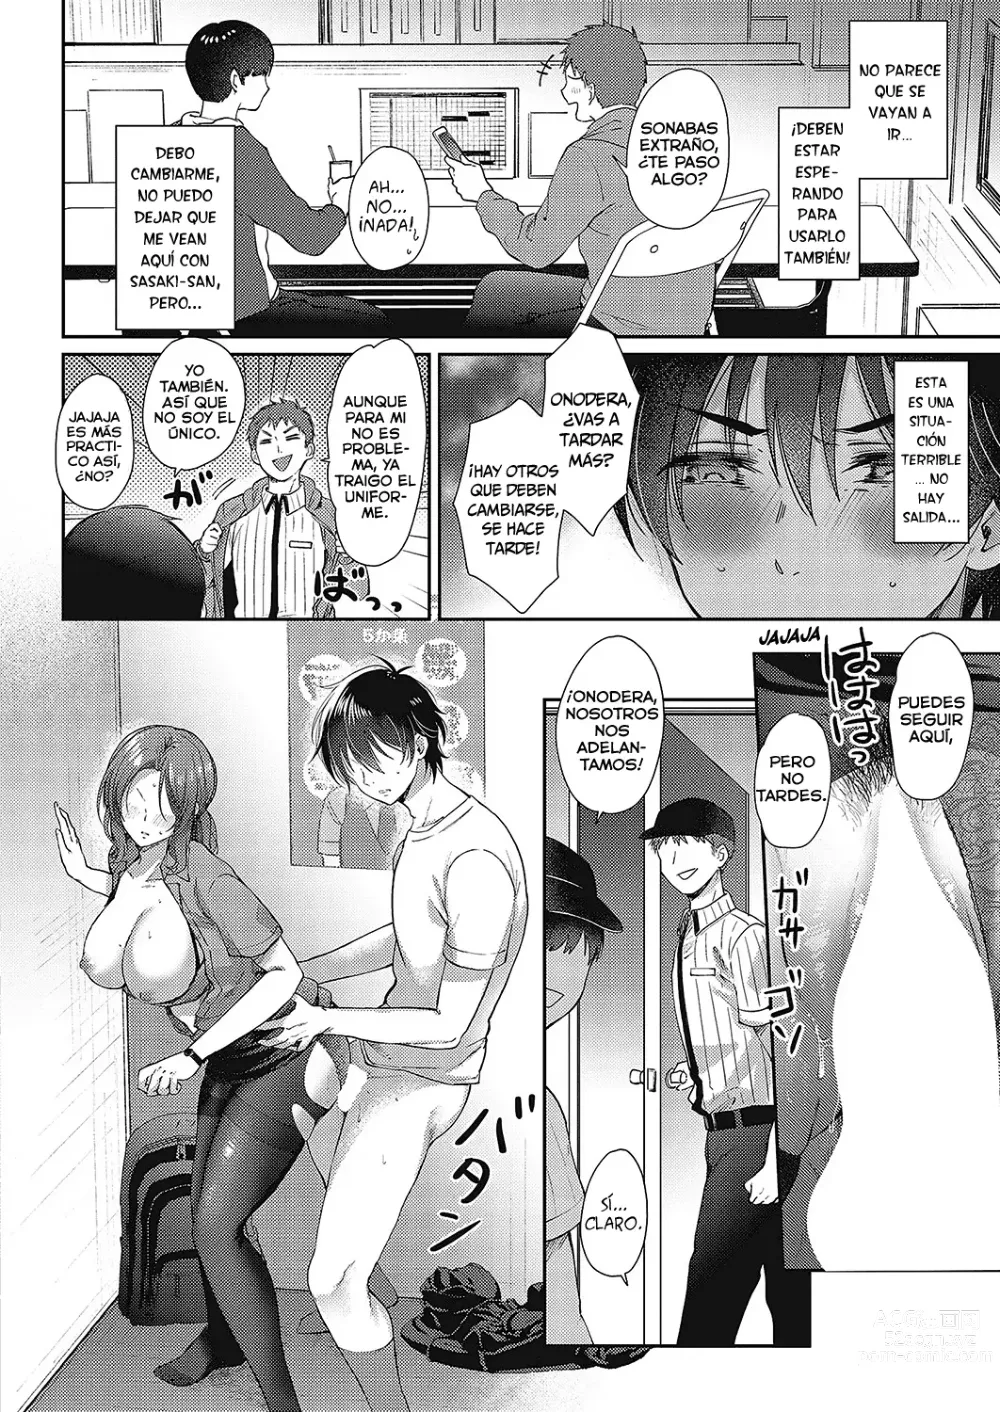 Page 22 of manga Eat in Take Out Parte 01